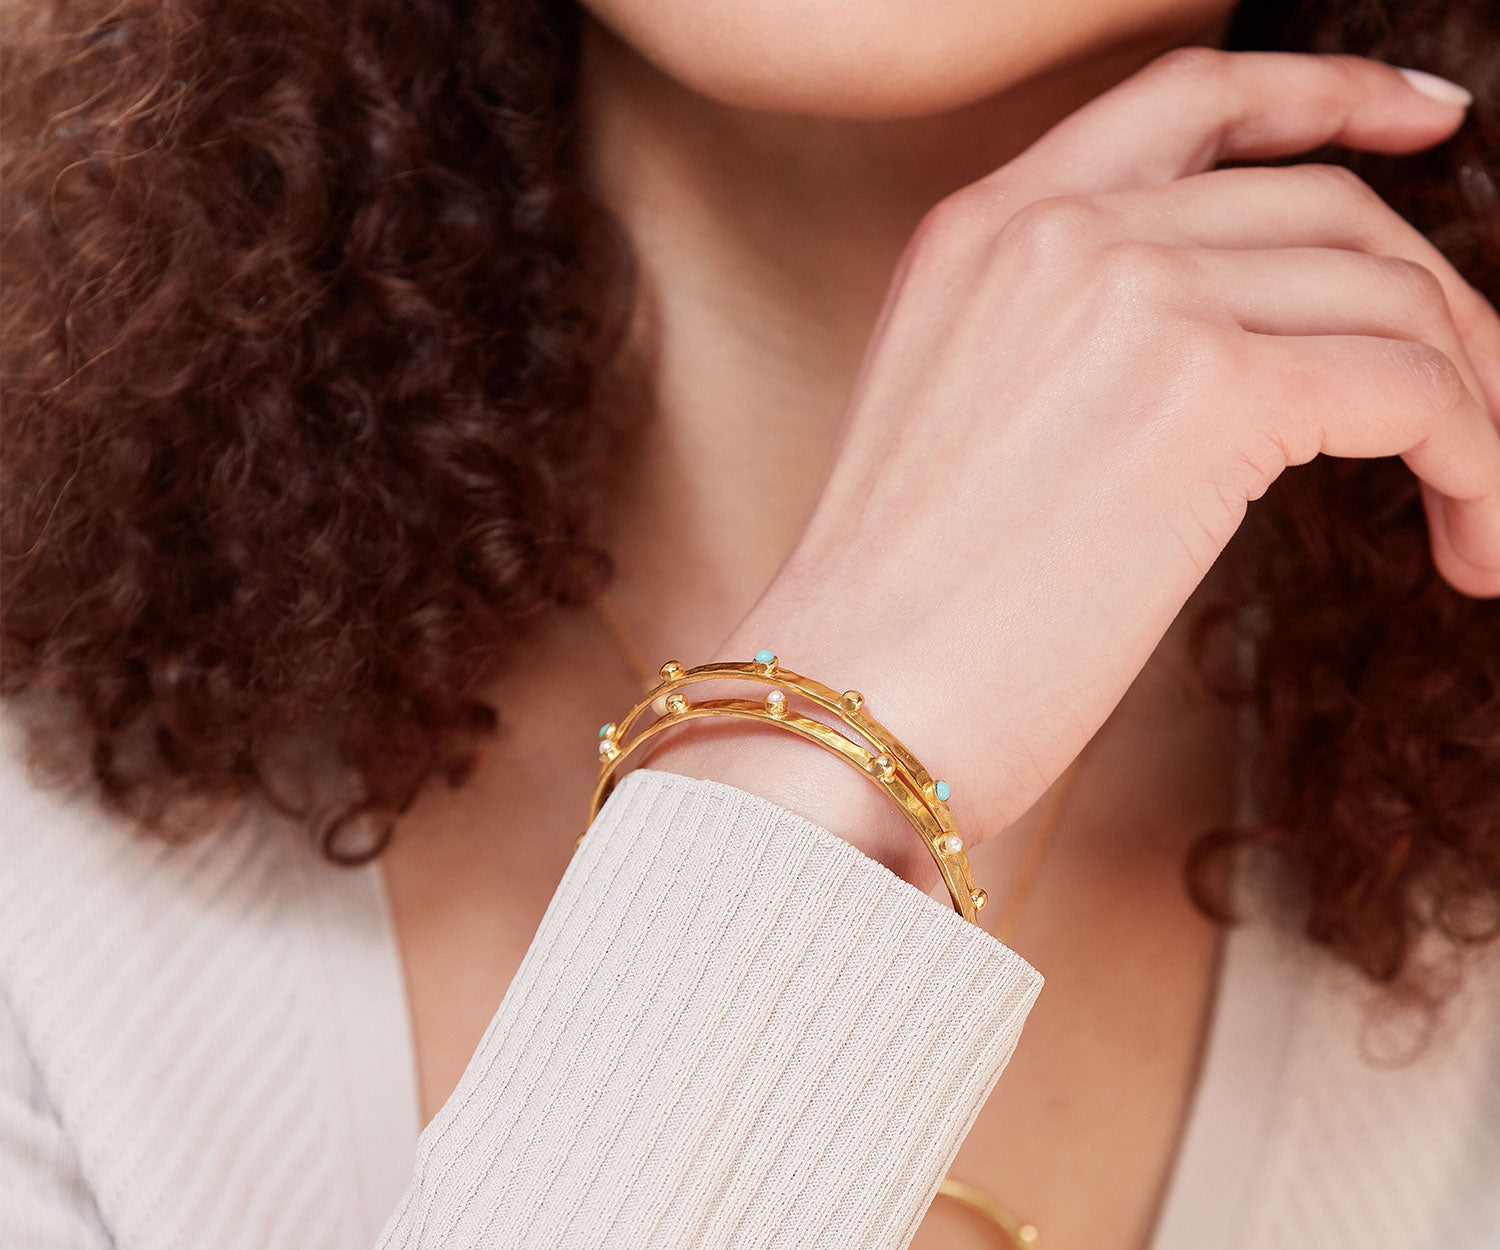 Tanrica Gold Bangle Bracelet with Pearl Beads | Sustainable Jewellery by Ottoman Hands